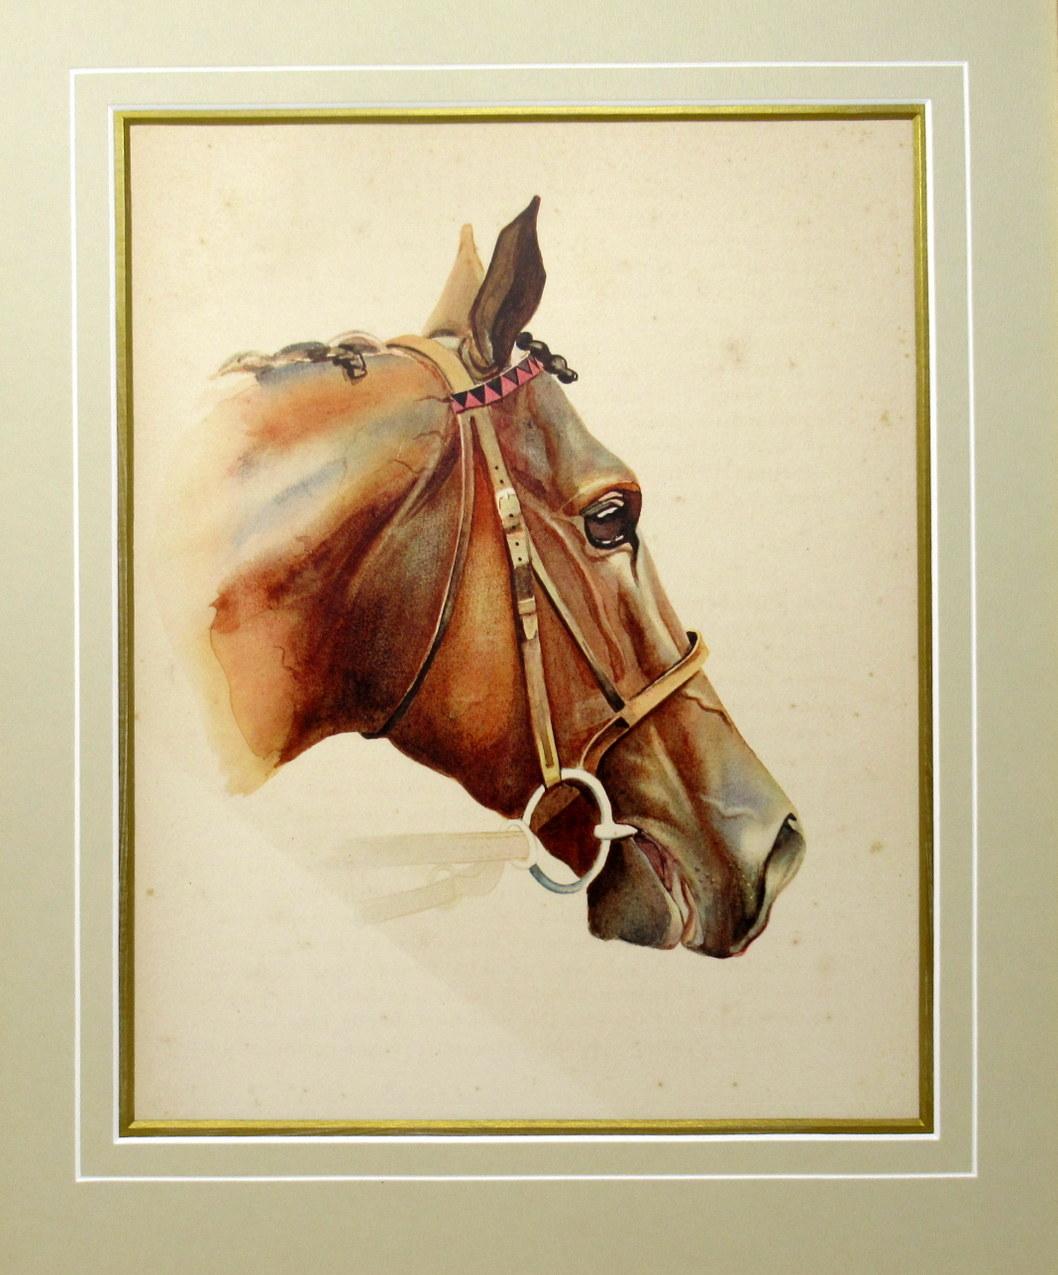 An exceptionally fine quality framed color print on paper of French origin, depicting a French Thoroughbred Racehorse named Sir Gallahad 1926-1949,
Complete with printed eight-page booklet, see images. 

Professionally re-mounted on artists card